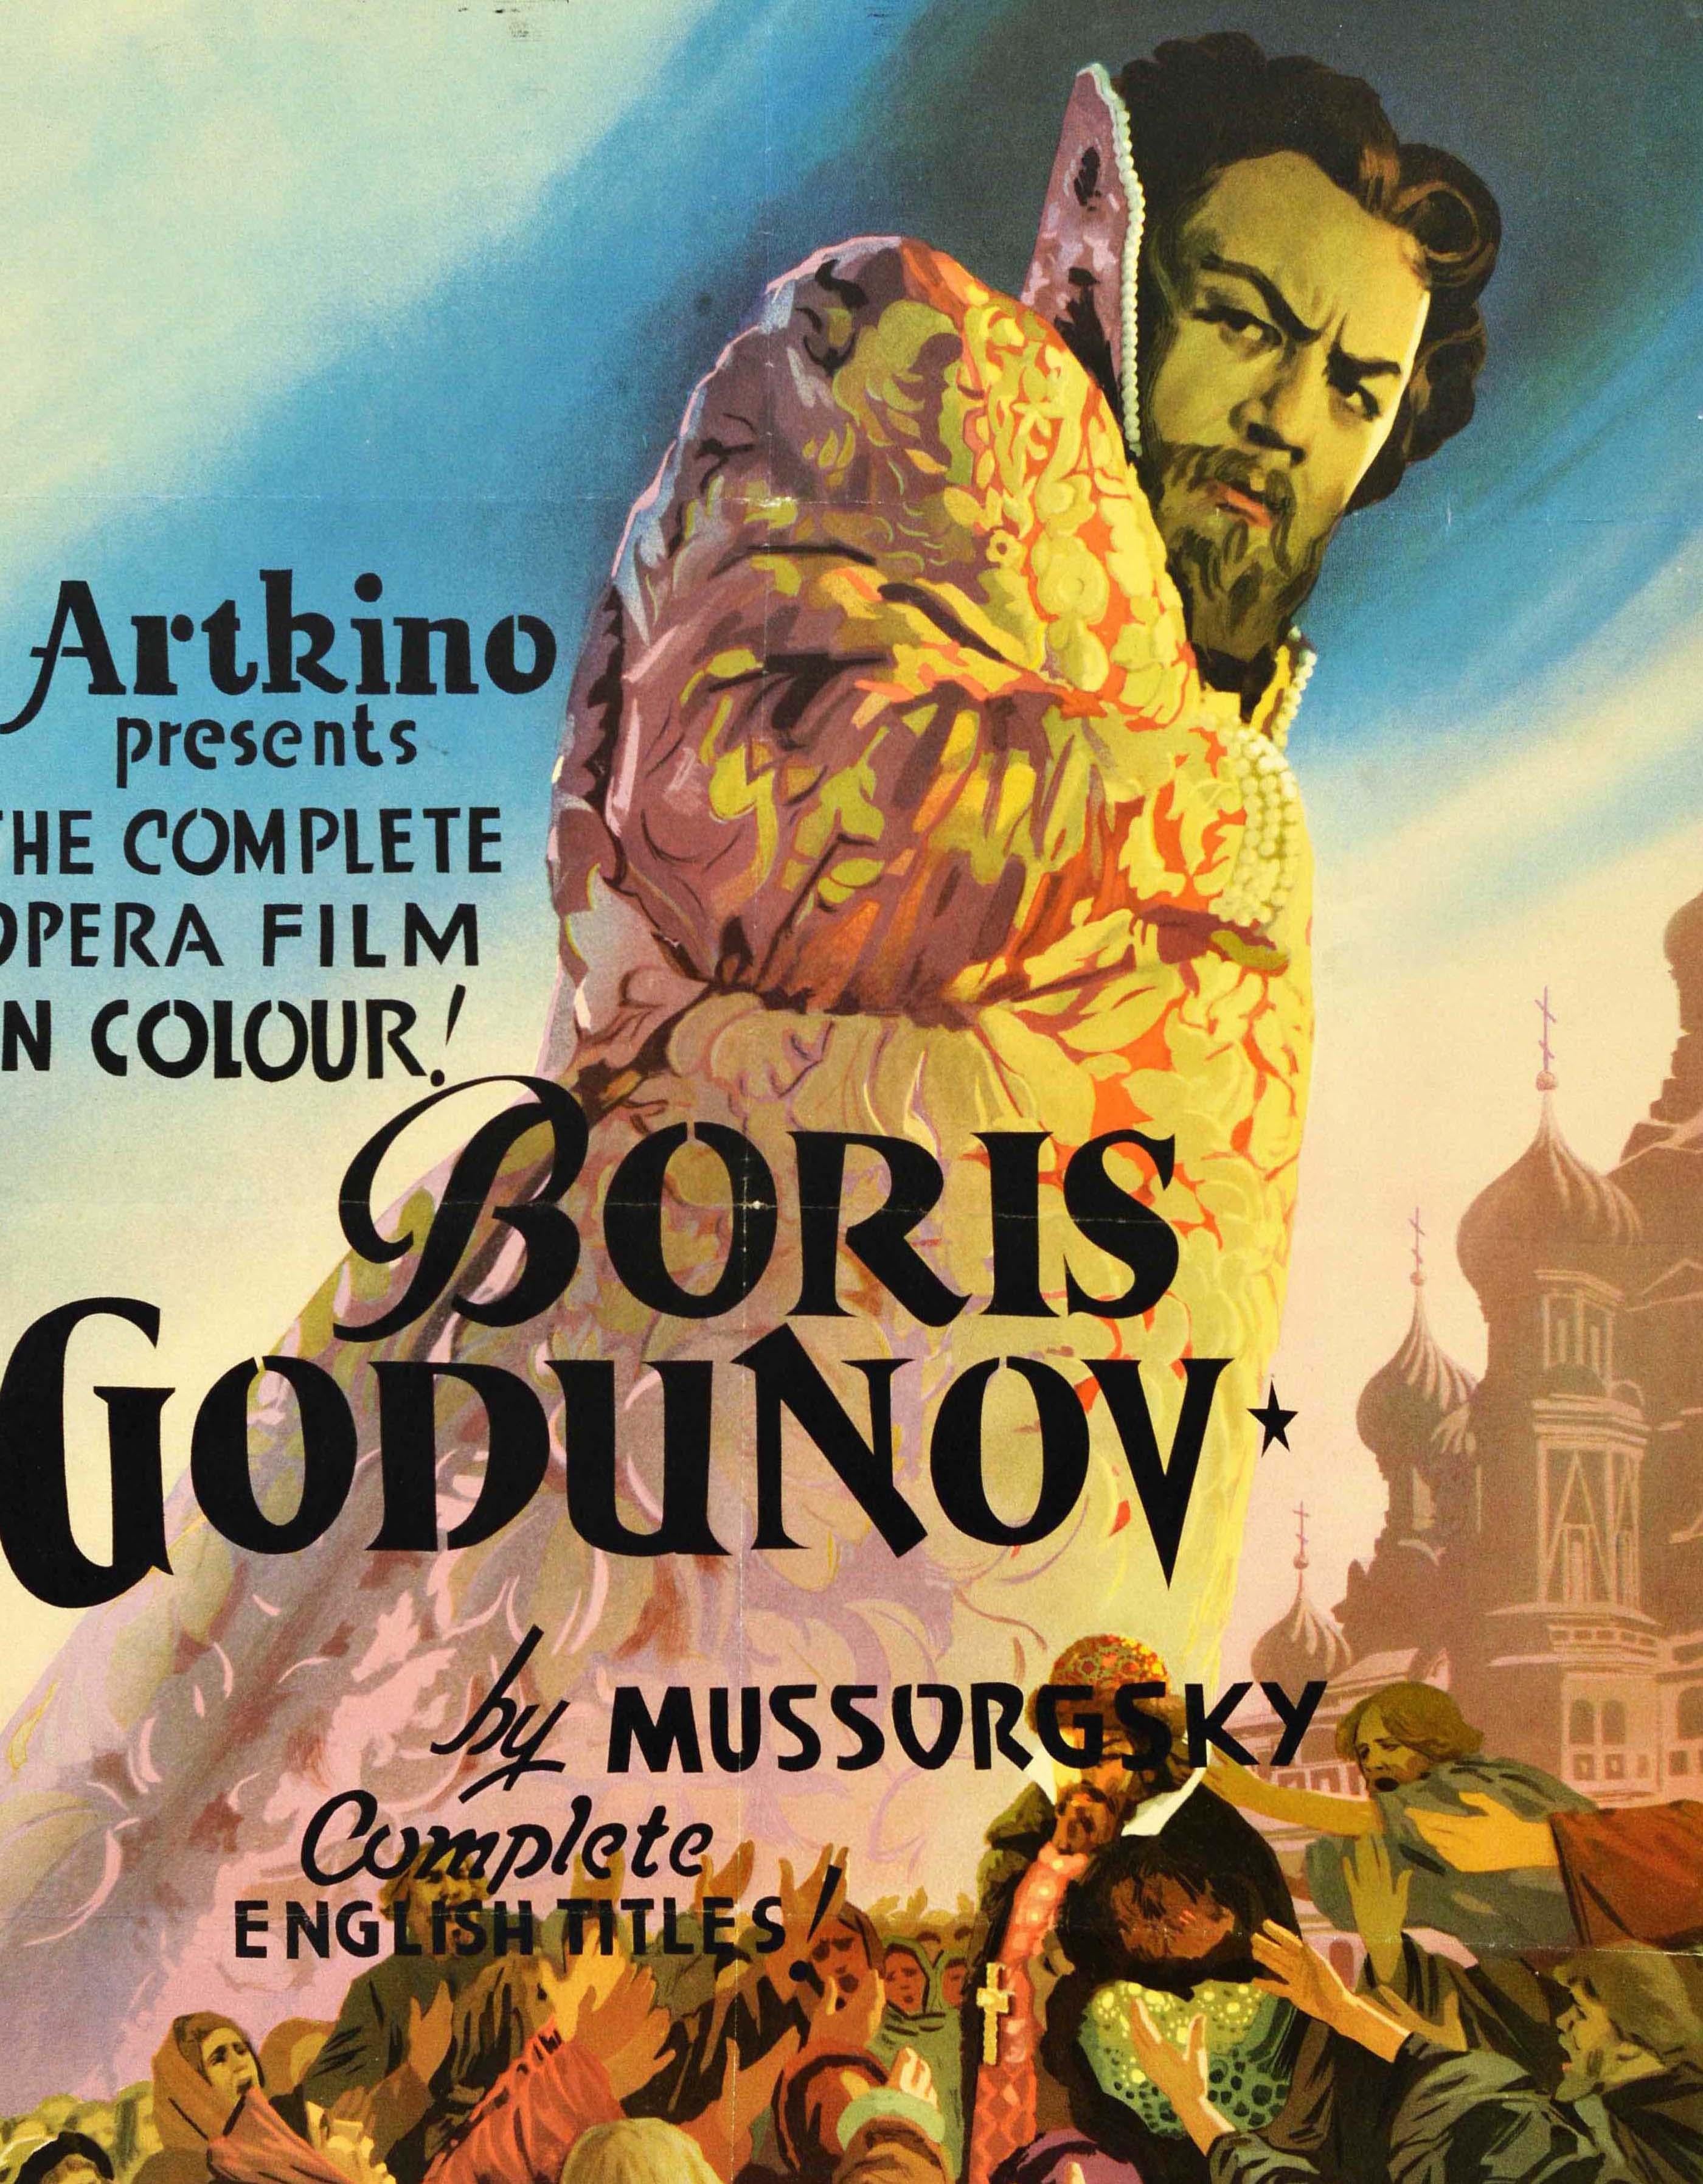 Original vintage Soviet movie poster for the musical drama Boris Godunov directed by Vera Stroyeva, based on the 1874 libretto by the Russian composer Modest Mussorgsky (1839-1881) and play by the 